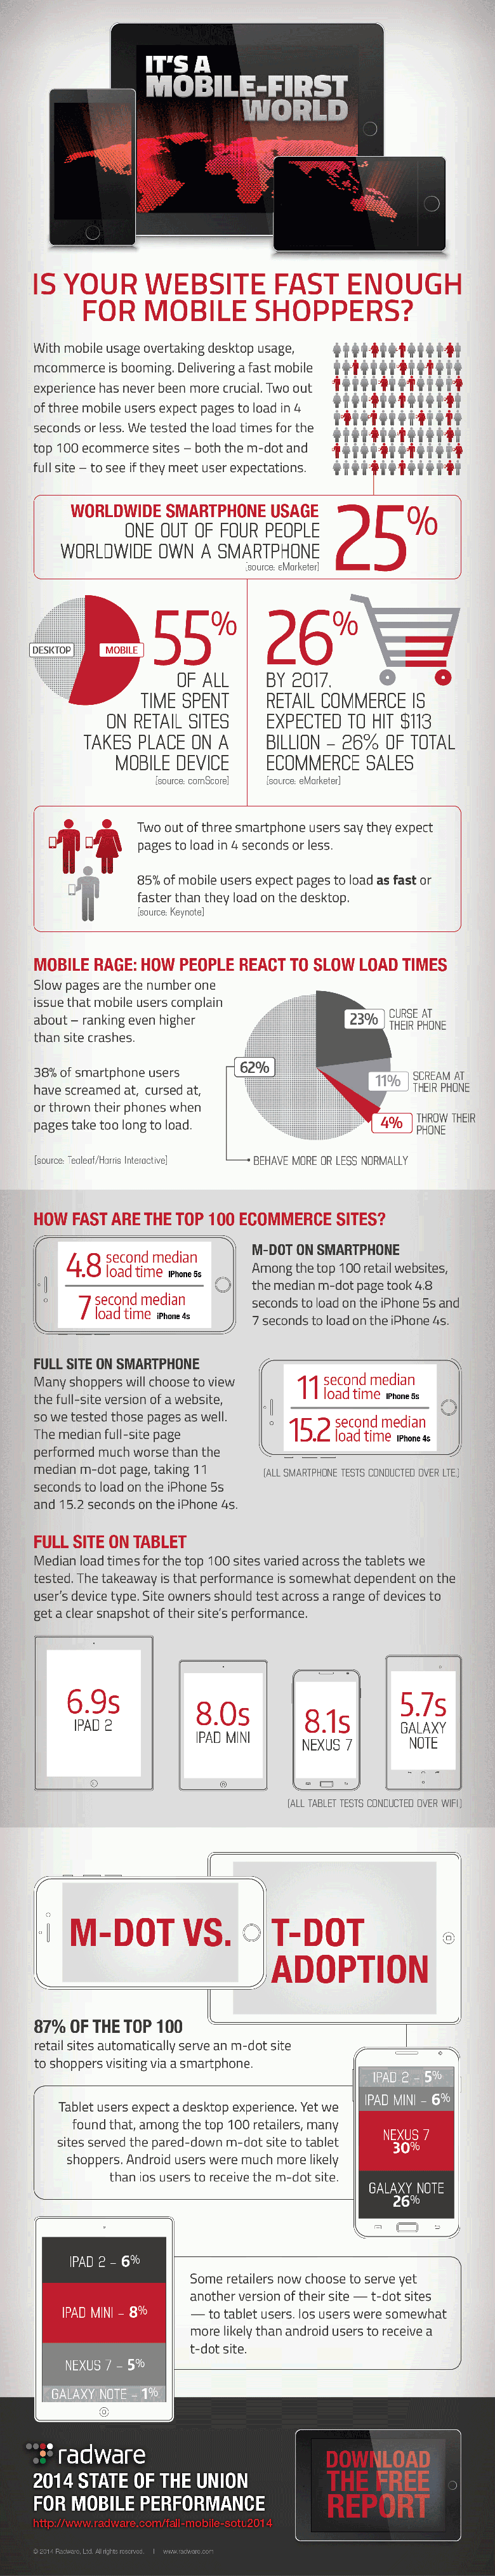 INFOGRAPHIC: Is your website fast enough for mobile shoppers?